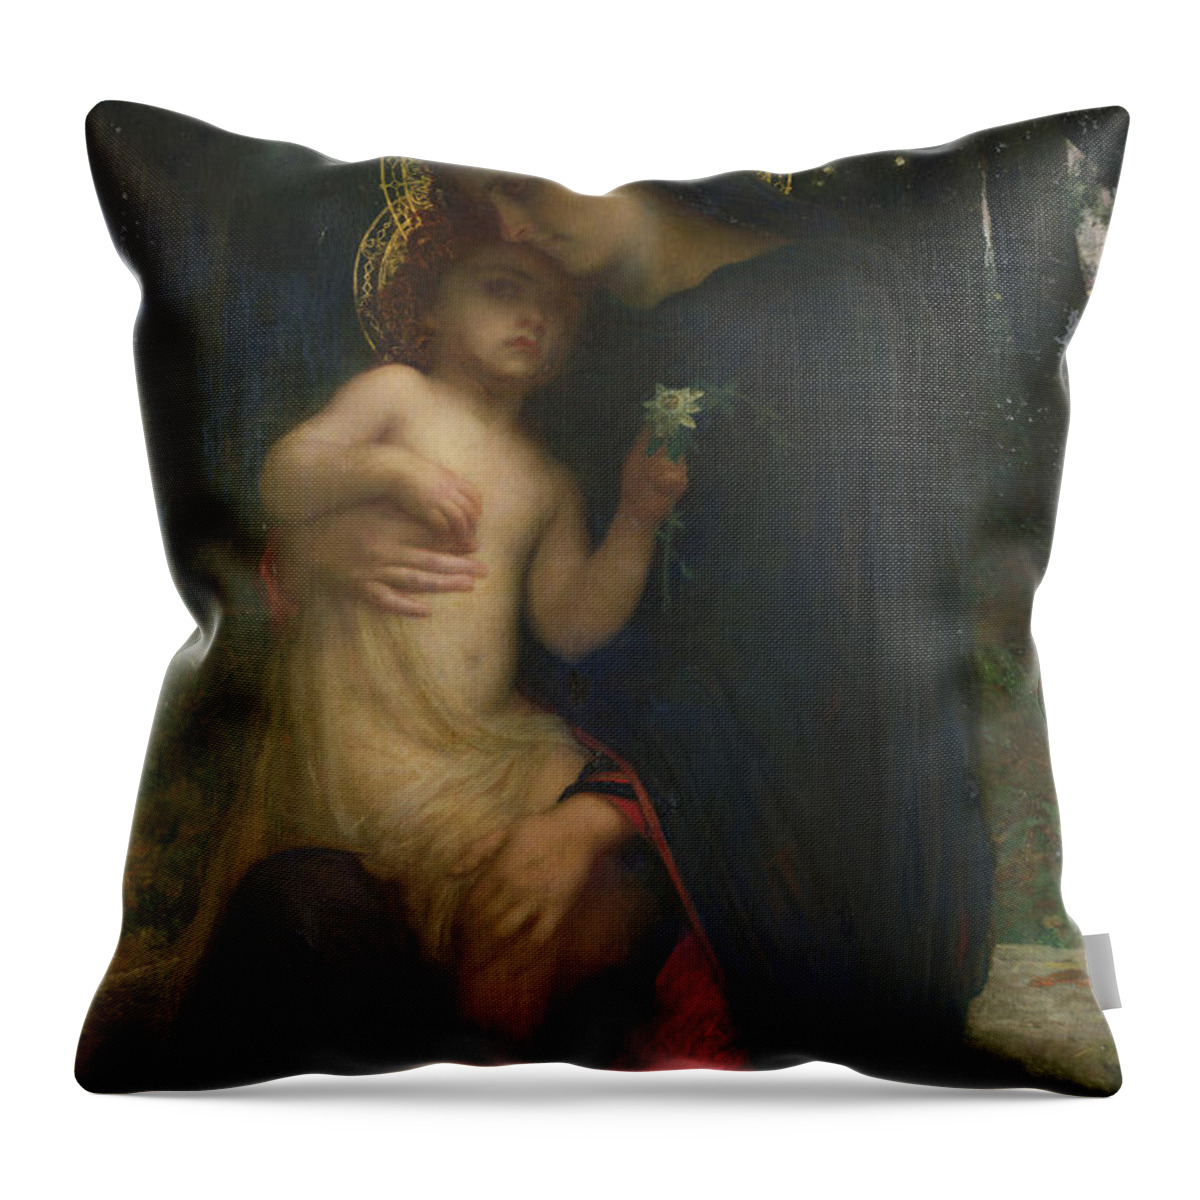 L'addolorata Throw Pillow featuring the painting LAddolorata by Antoine Auguste Ernest Herbert or Hebert